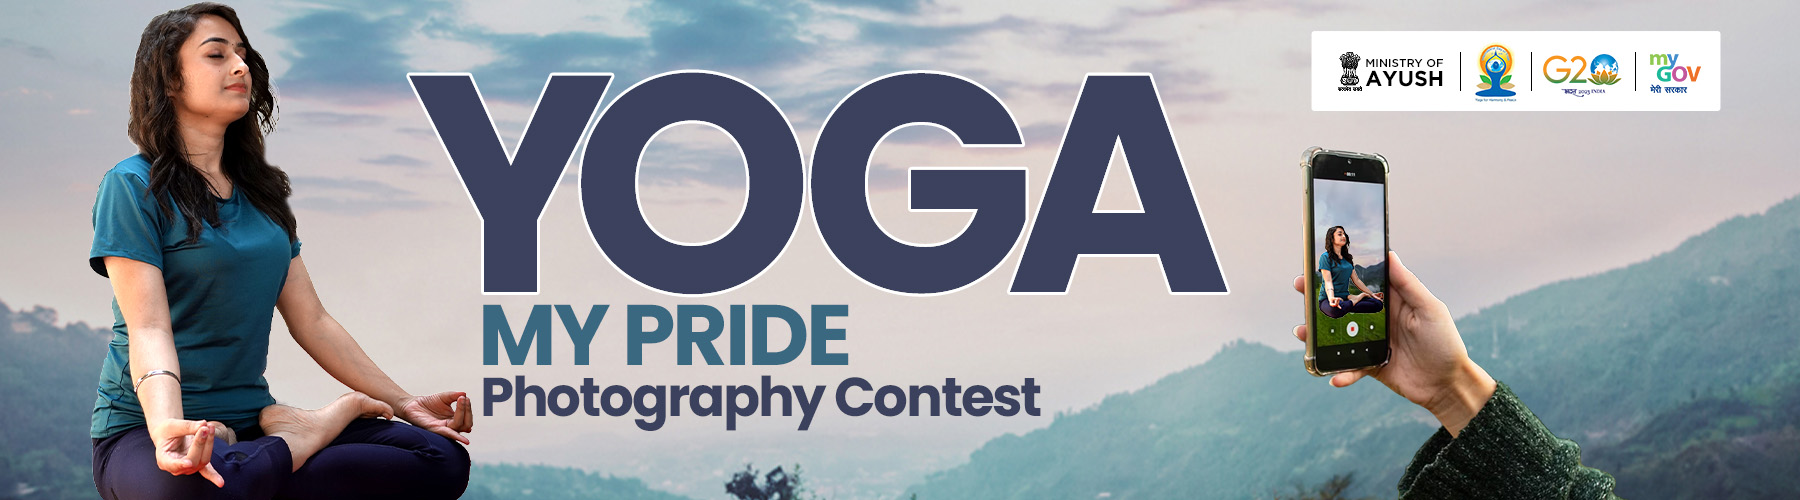 "Yoga My Pride" Photography Contest during IDY 2023 Celebration till 30 June 2023 (expired)